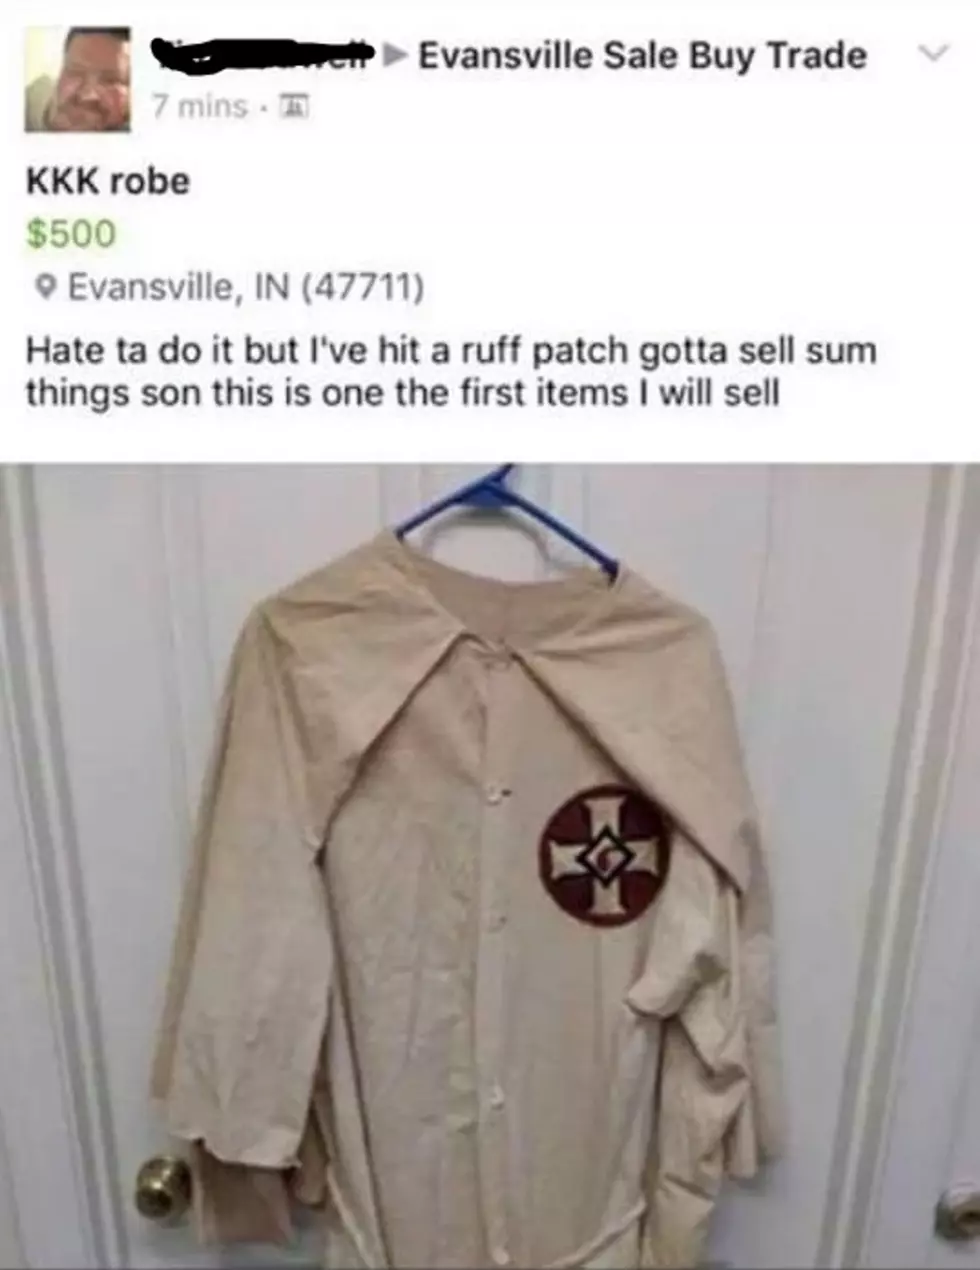 Holy S***, Someone Tried to Sell a KKK Robe on Facebook – Weird and Worst of Evansville Buy/Sell/Trade